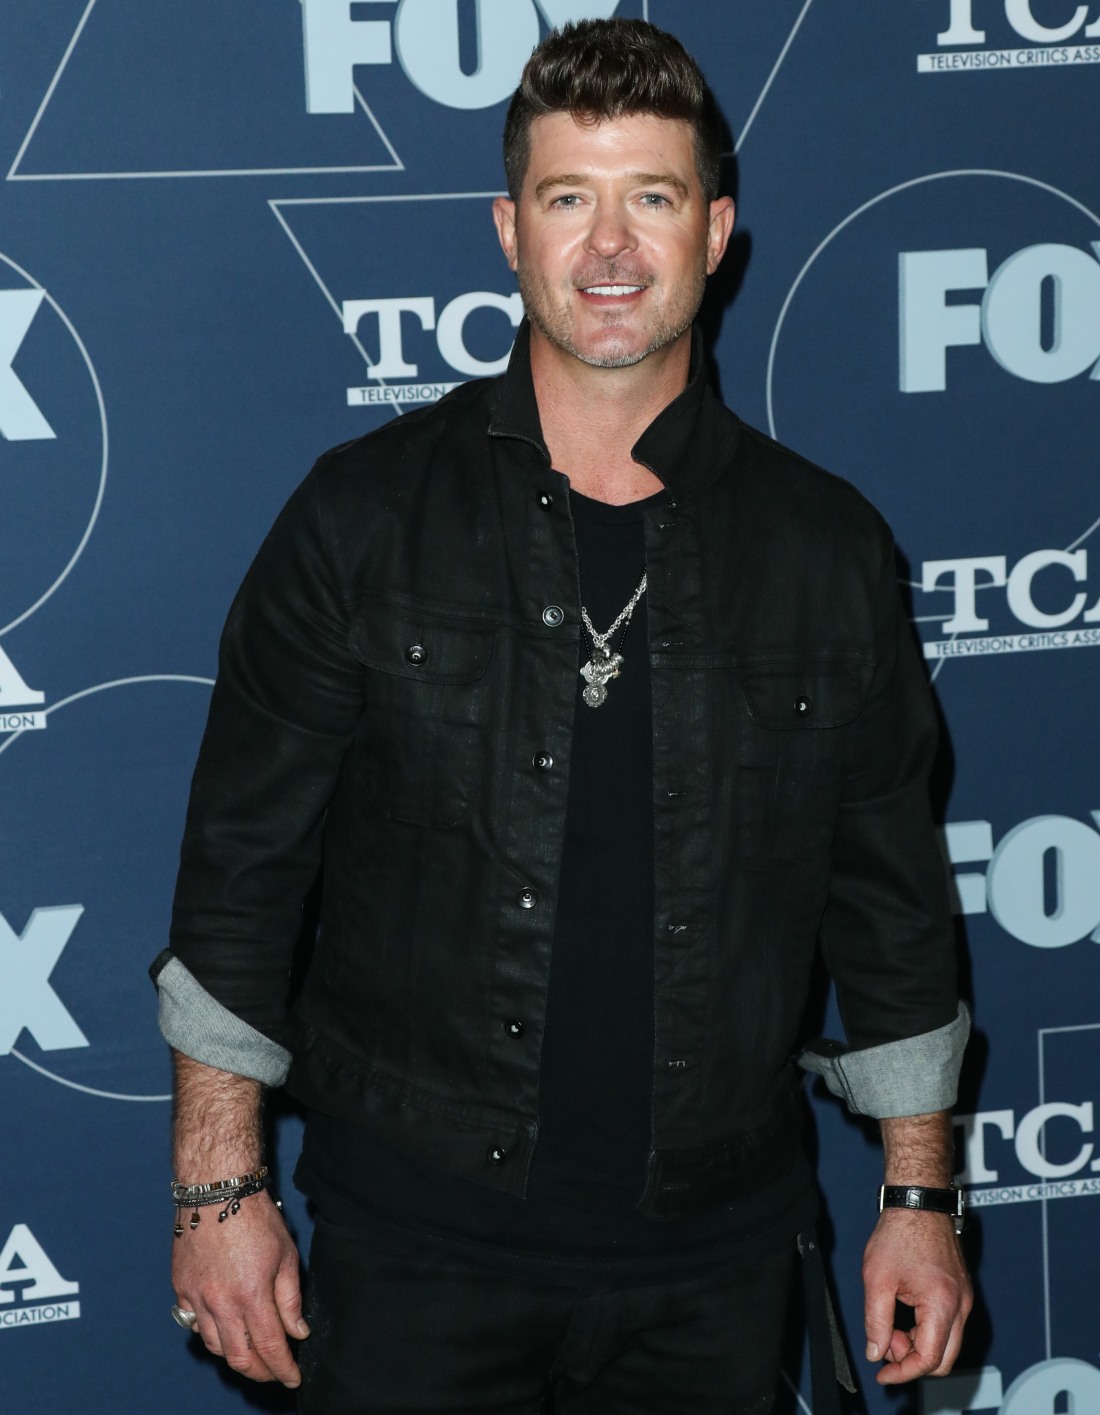 Singer Robin Thicke arrives at the FOX Winter TCA 2020 All-Star Party held at The Langham Huntington Hotel on January 7, 2020 in Pasadena, Los Angeles, California, United States.